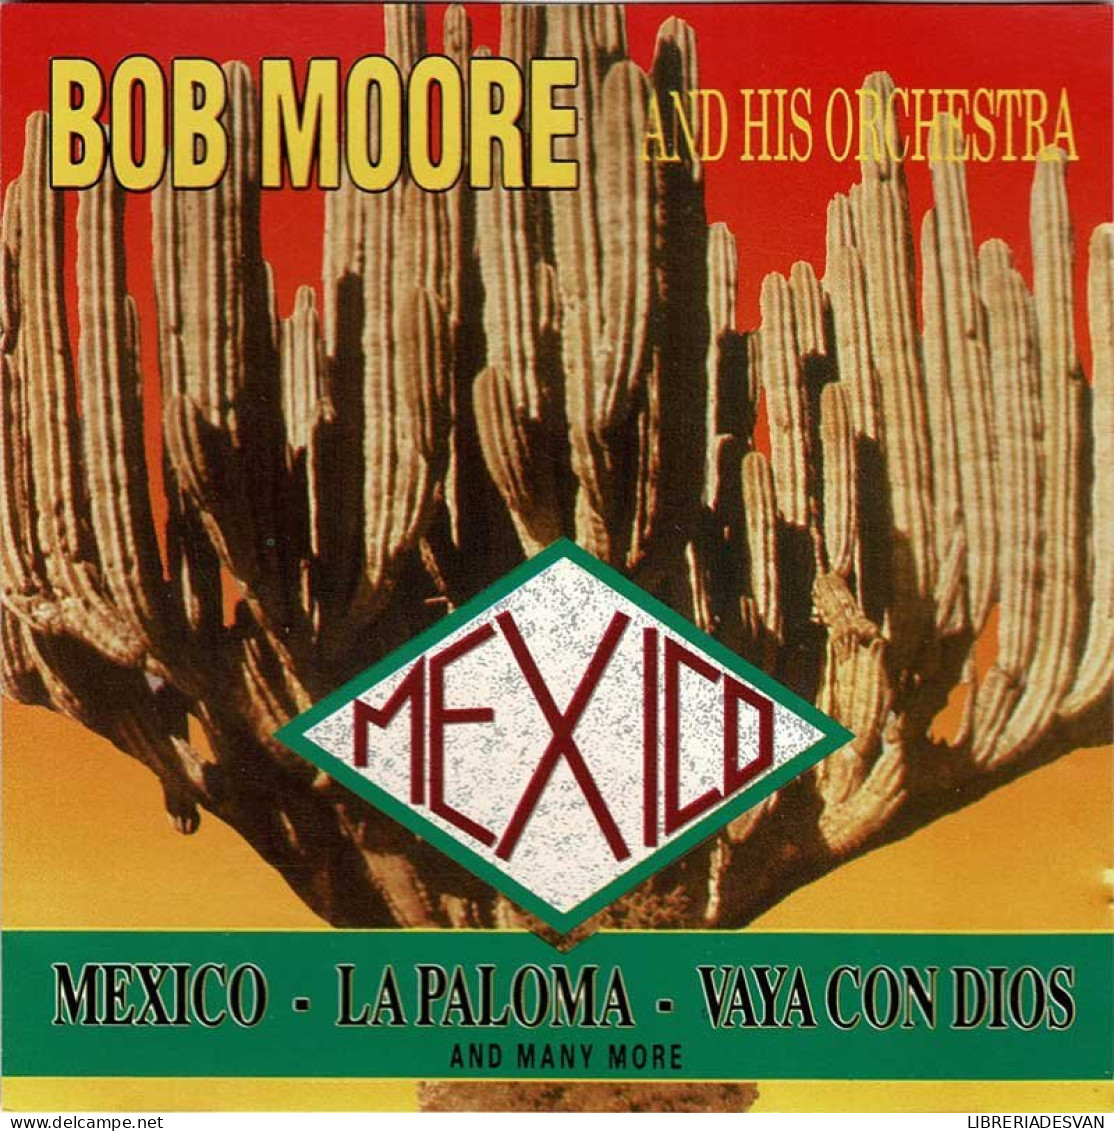 Bob Moore And His Orchestra - Mexico. CD - Country & Folk